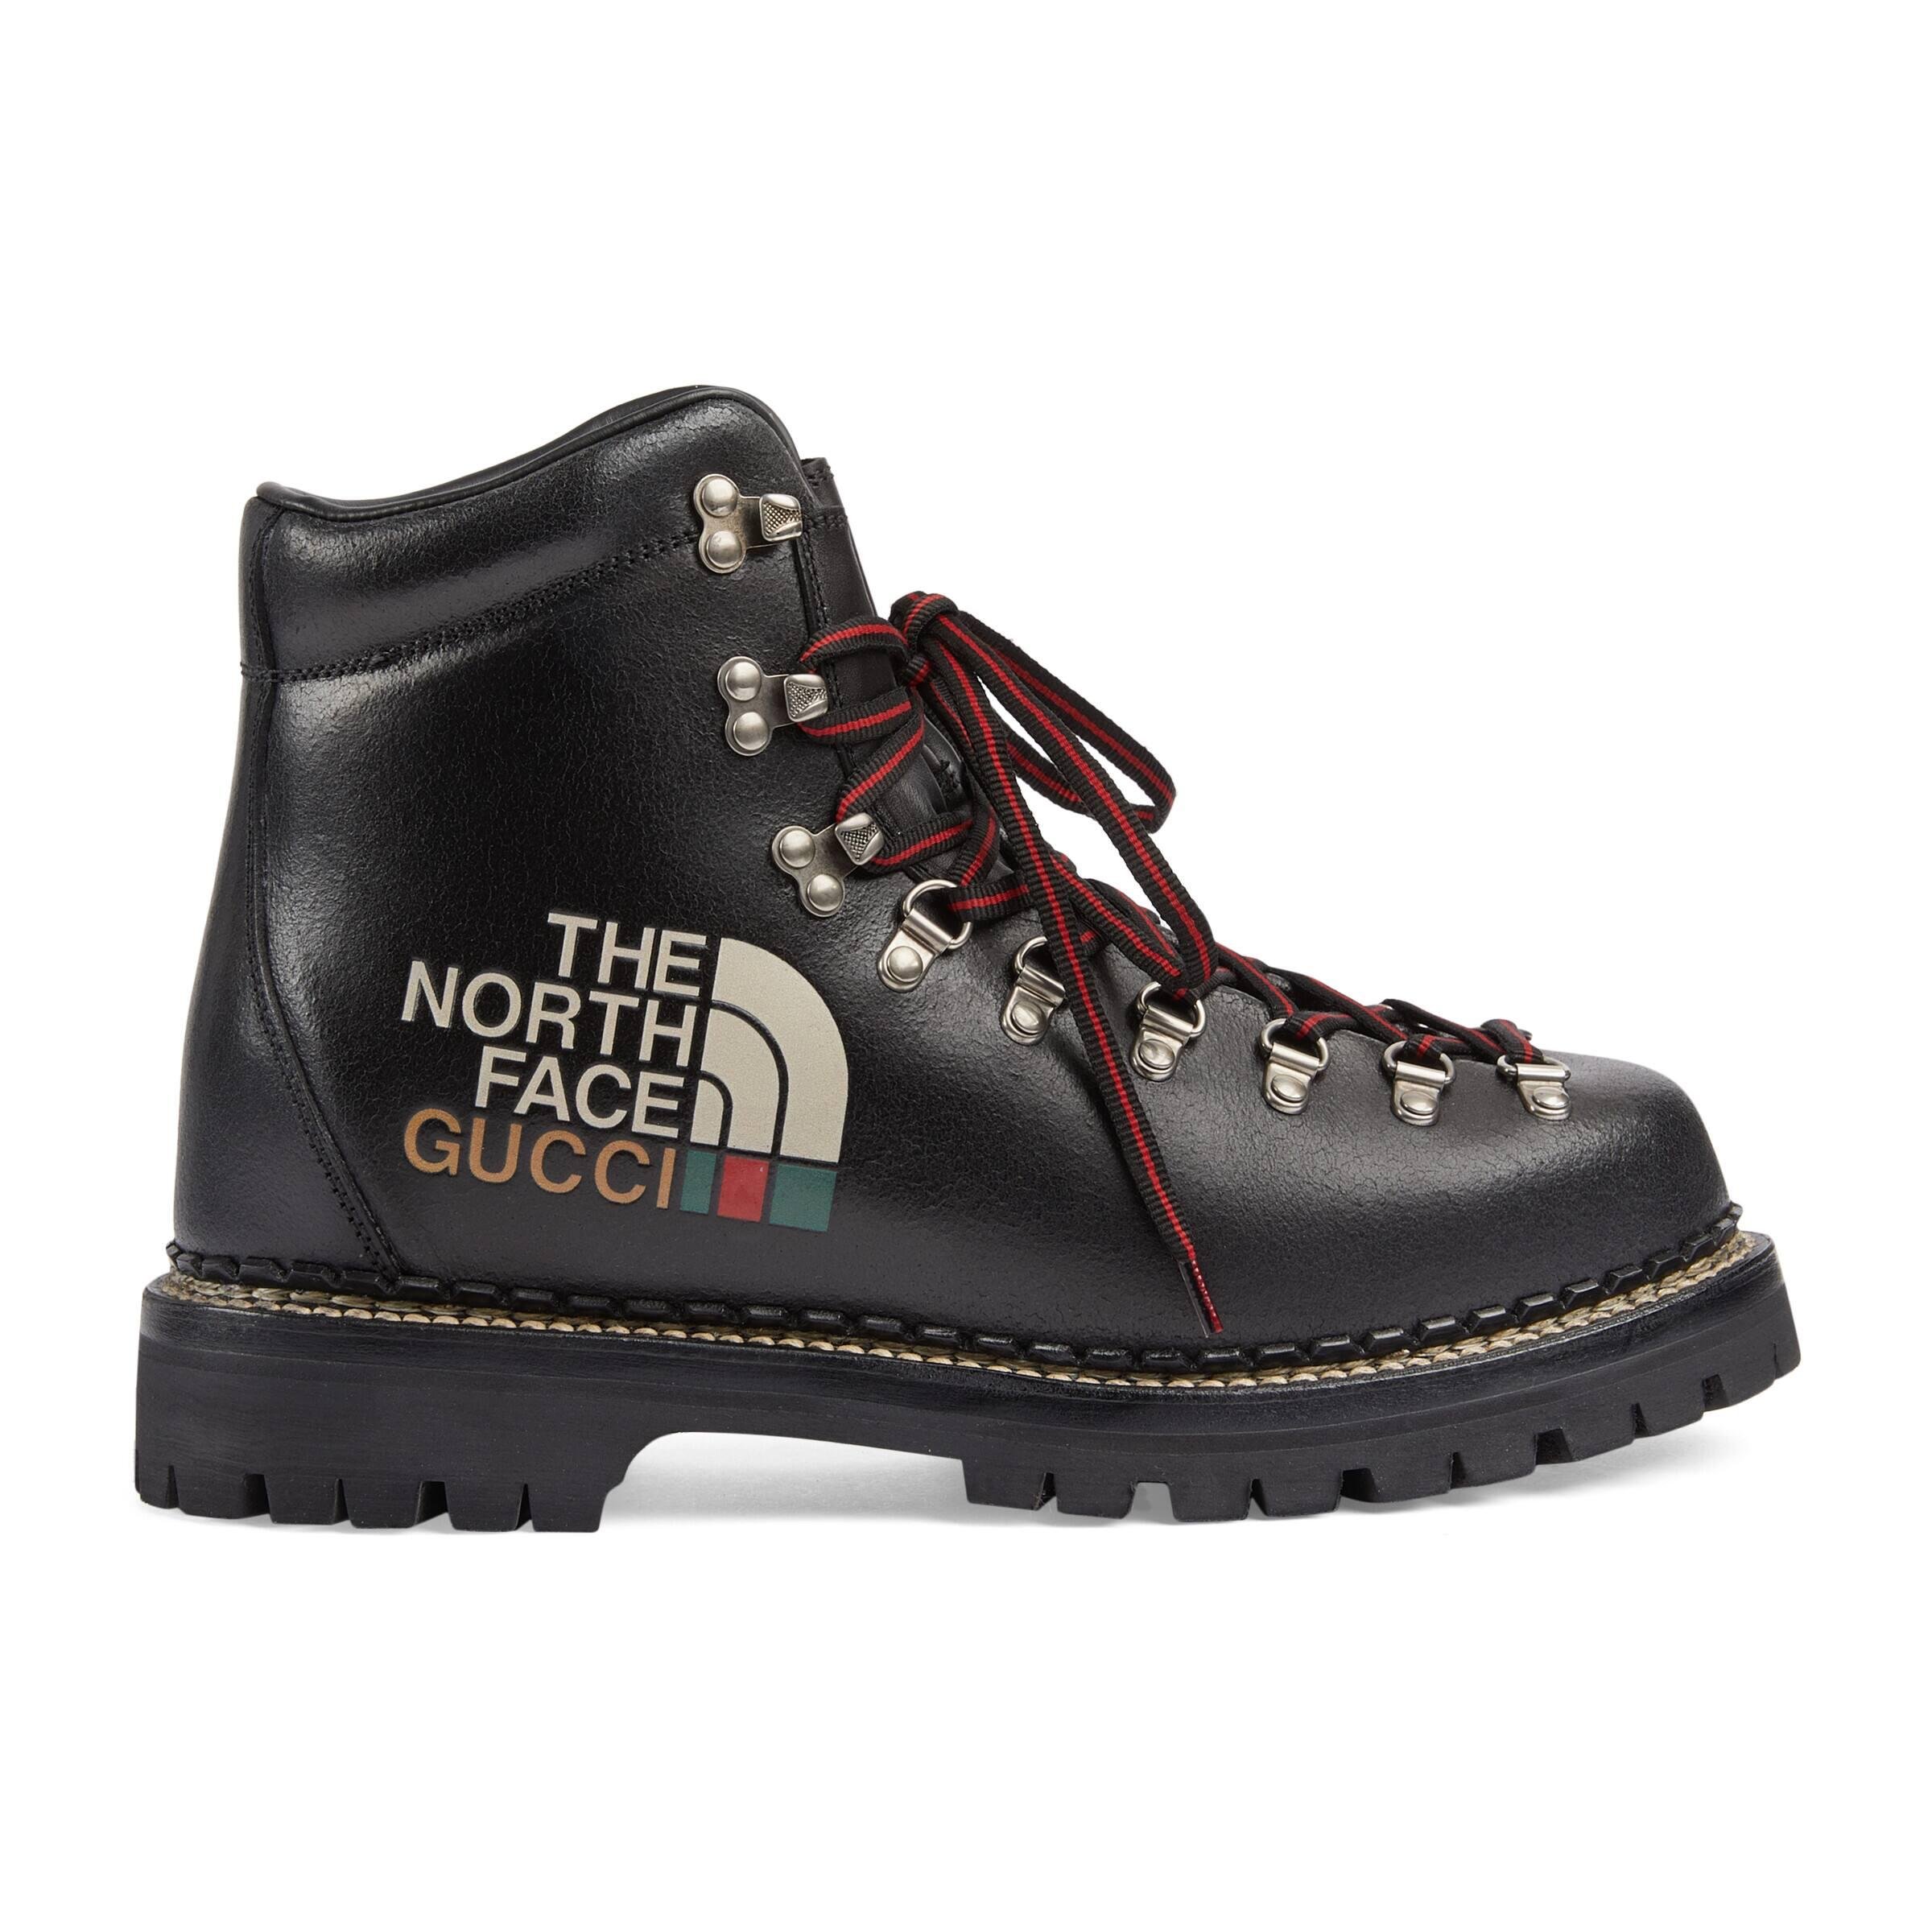 The North Face x Gucci - Authenticated Boots - Leather Black Plain for Men, Never Worn